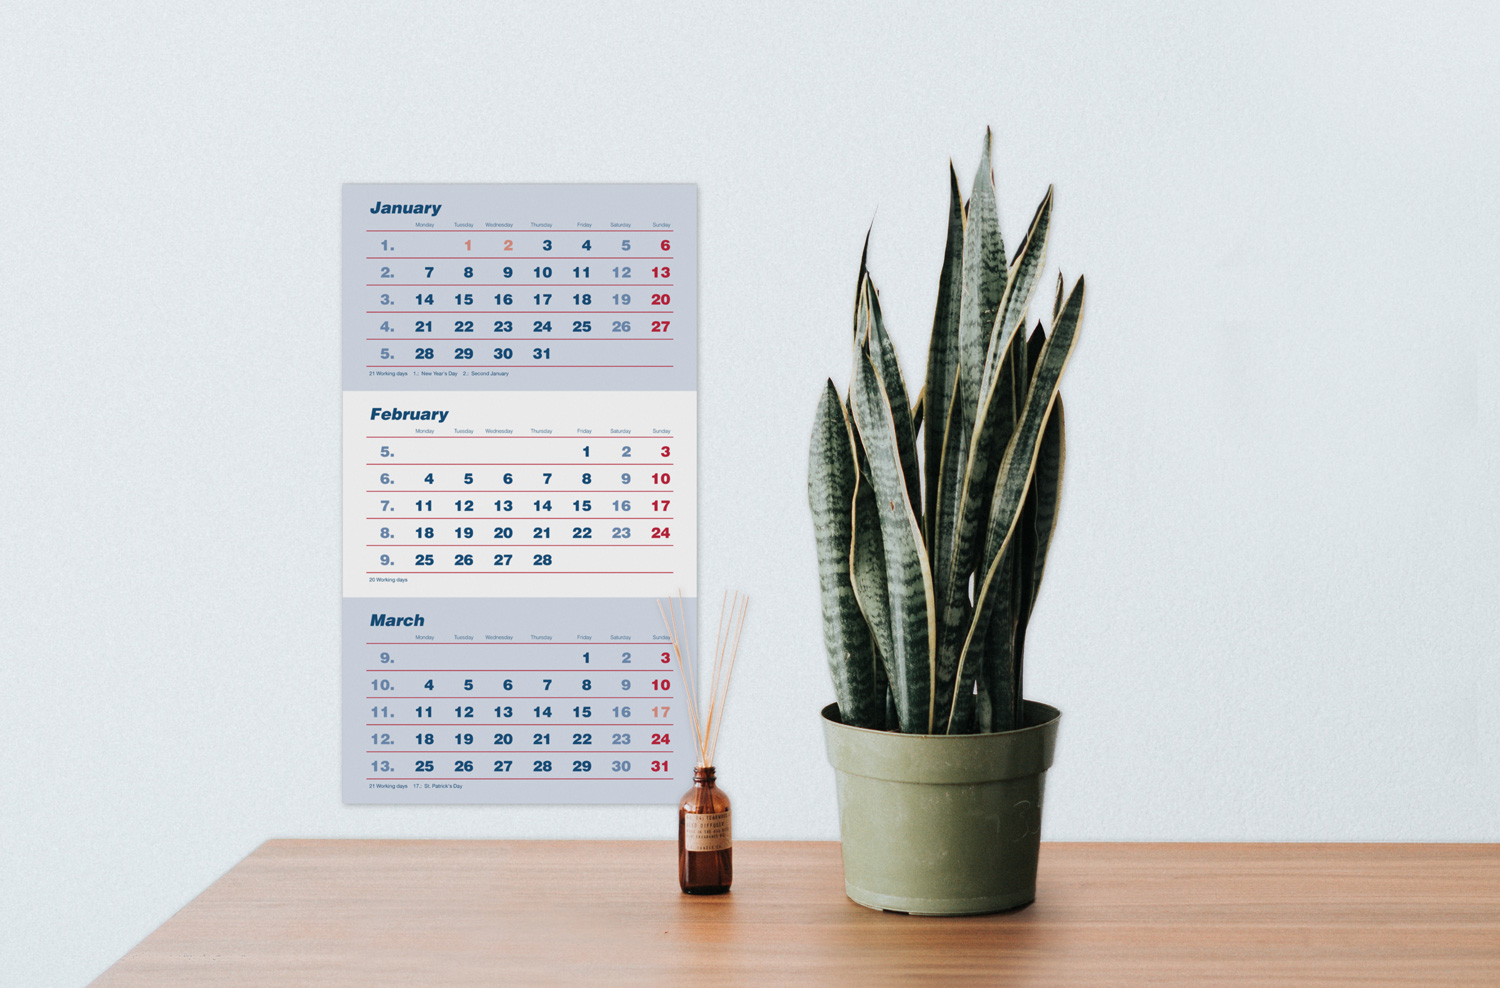 Three months calendar in English with stacked months. It was set in red and blue in Helvetica and includes the number of working days, the calendar week and English holidays